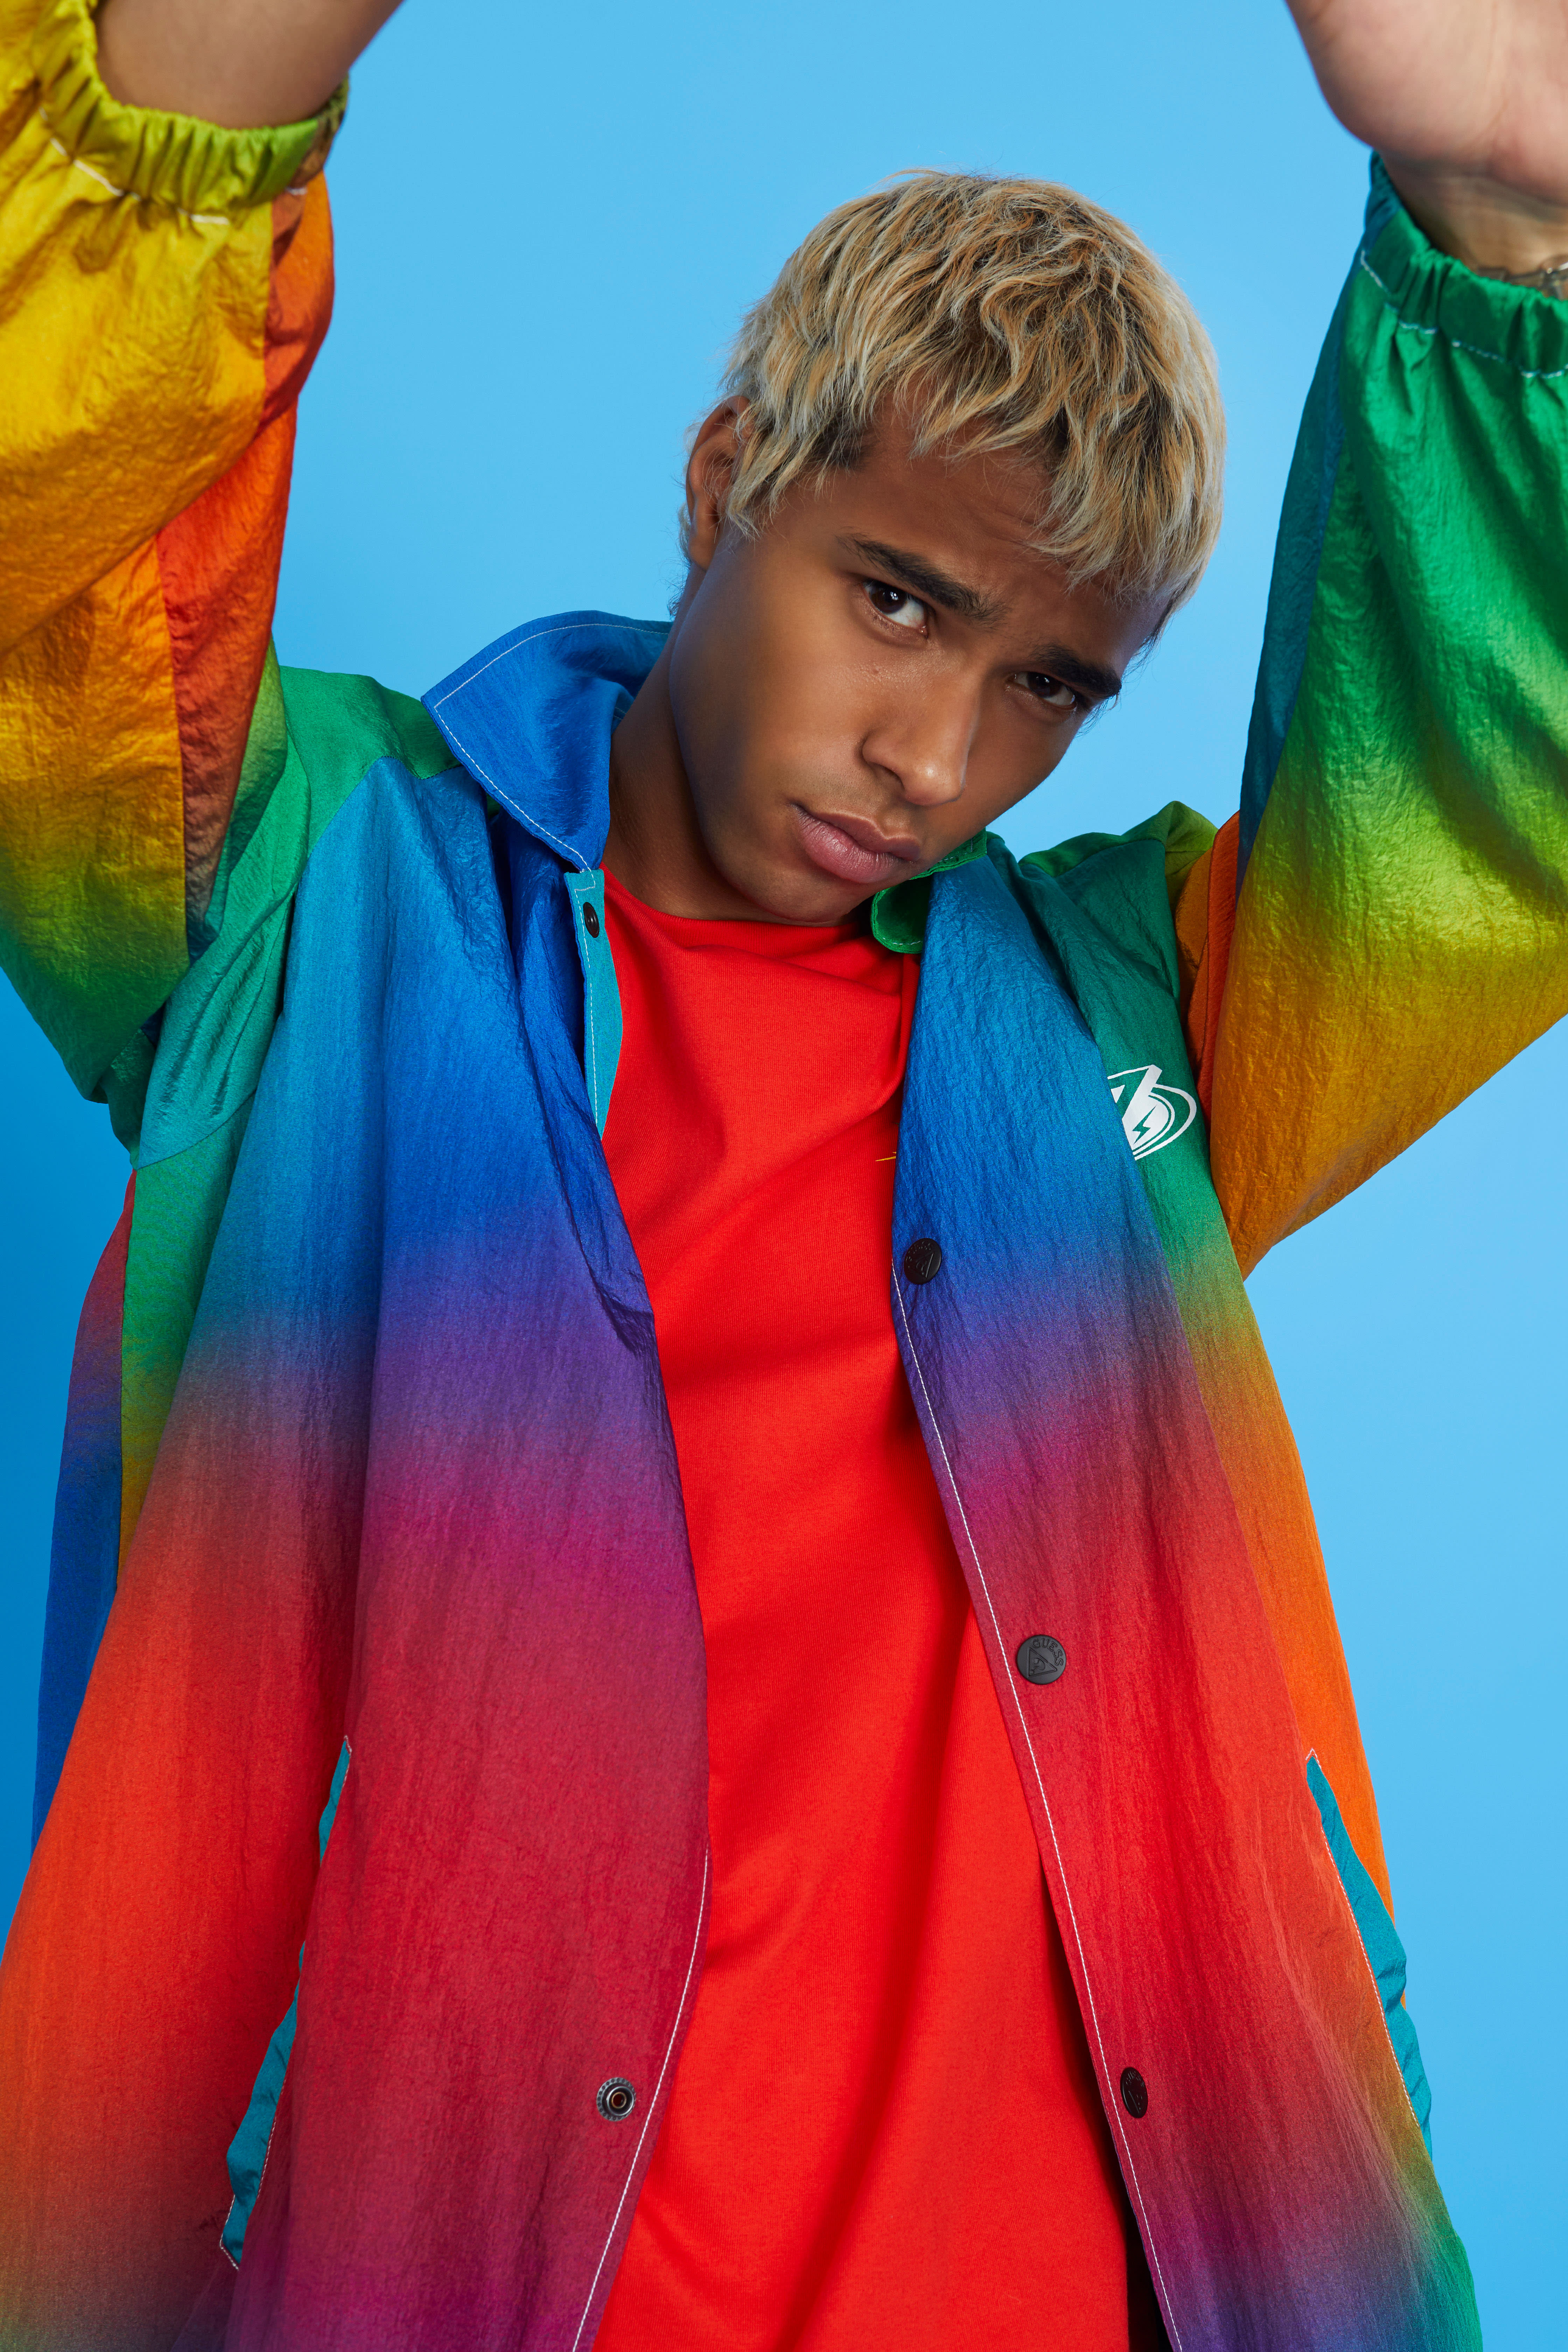 https://img.buzzfeed.com/buzzfeed-static/images/ZmxfbG9zc3kscV9hdXRv/y0x9rp1ik08nas32tbhm/j-balvin-guess-colores-capsule-collection.jpeg.jpeg